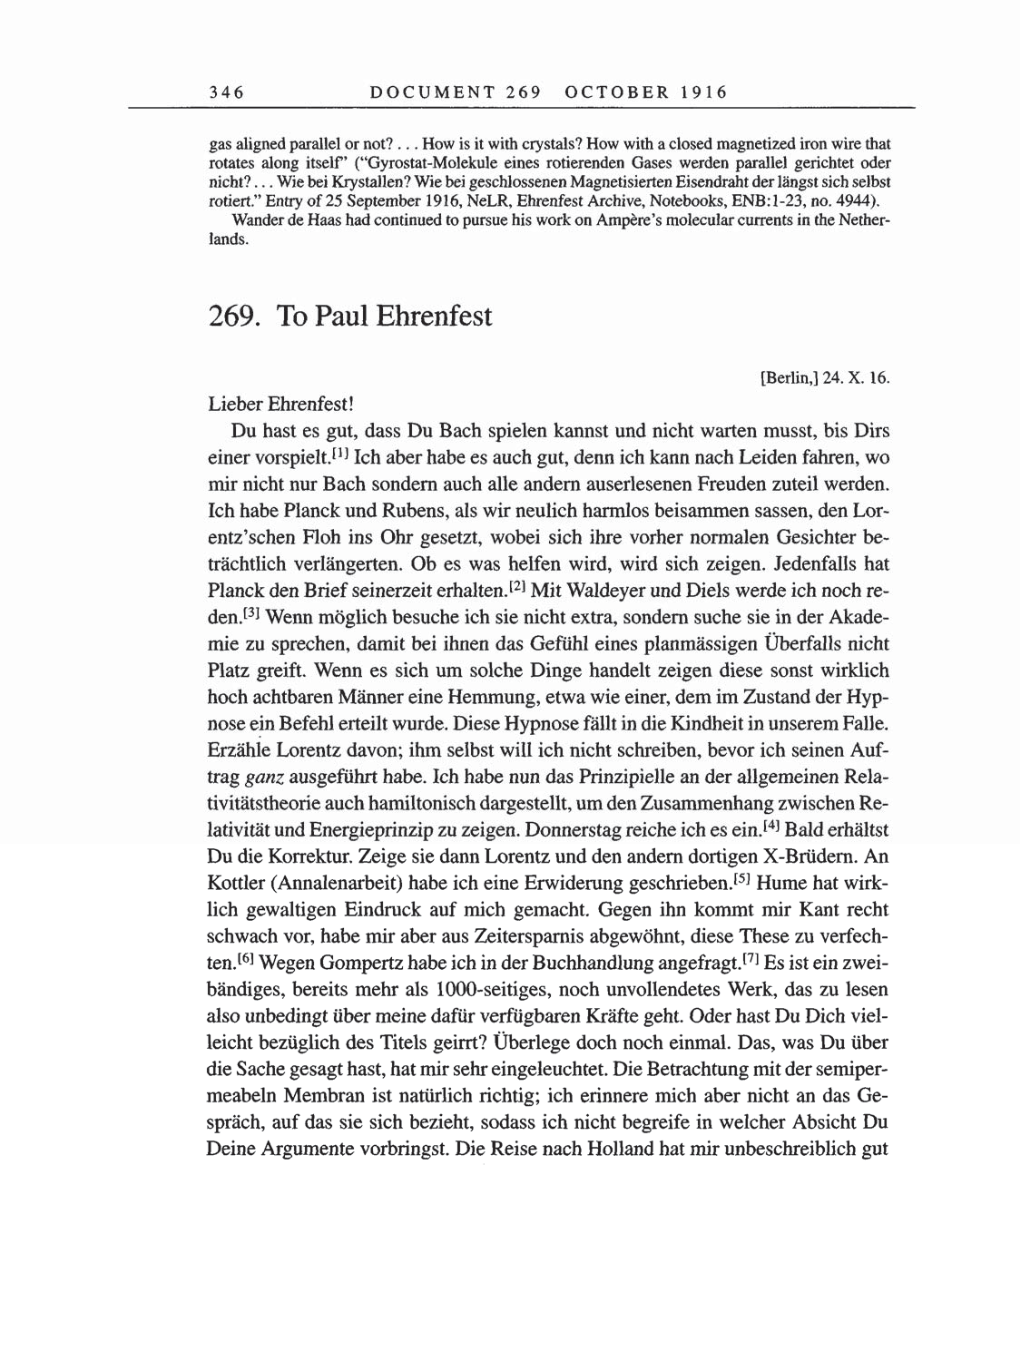 Volume 8, Part A: The Berlin Years: Correspondence 1914-1917 page 346